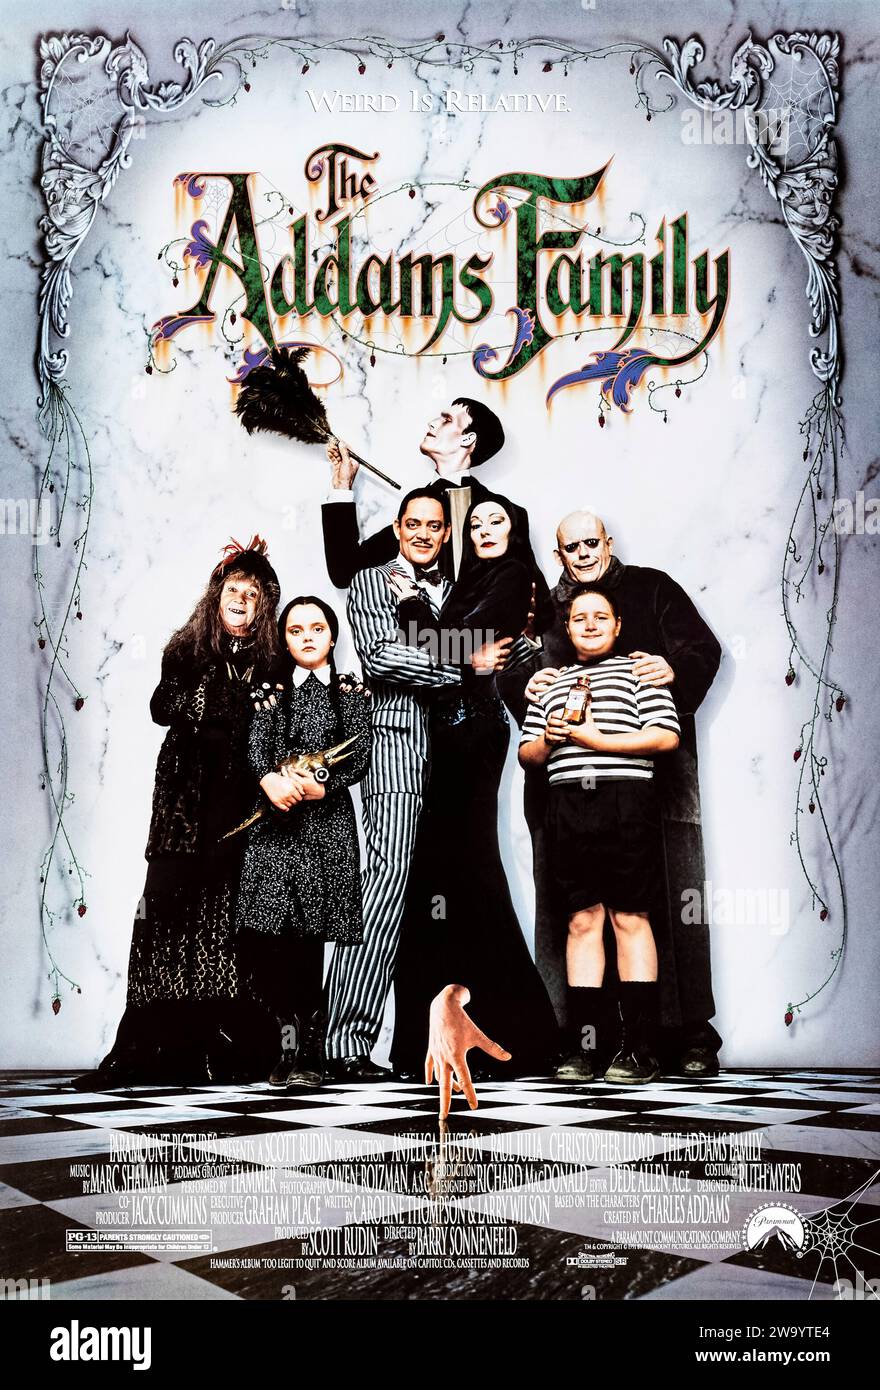 The Addams Family (1991) directed by Barry Sonnenfeld and starring Anjelica Huston, Raul Julia and Christopher Lloyd. Big screen outing for Charles Addams' much loved characters. Con artists plan to fleece an eccentric family using an accomplice who claims to be their long-lost uncle. Photograph of an original 1991 US one sheet poster ***EDITORIAL USE ONLY***. Credit: BFA / Paramount Pictures Stock Photo